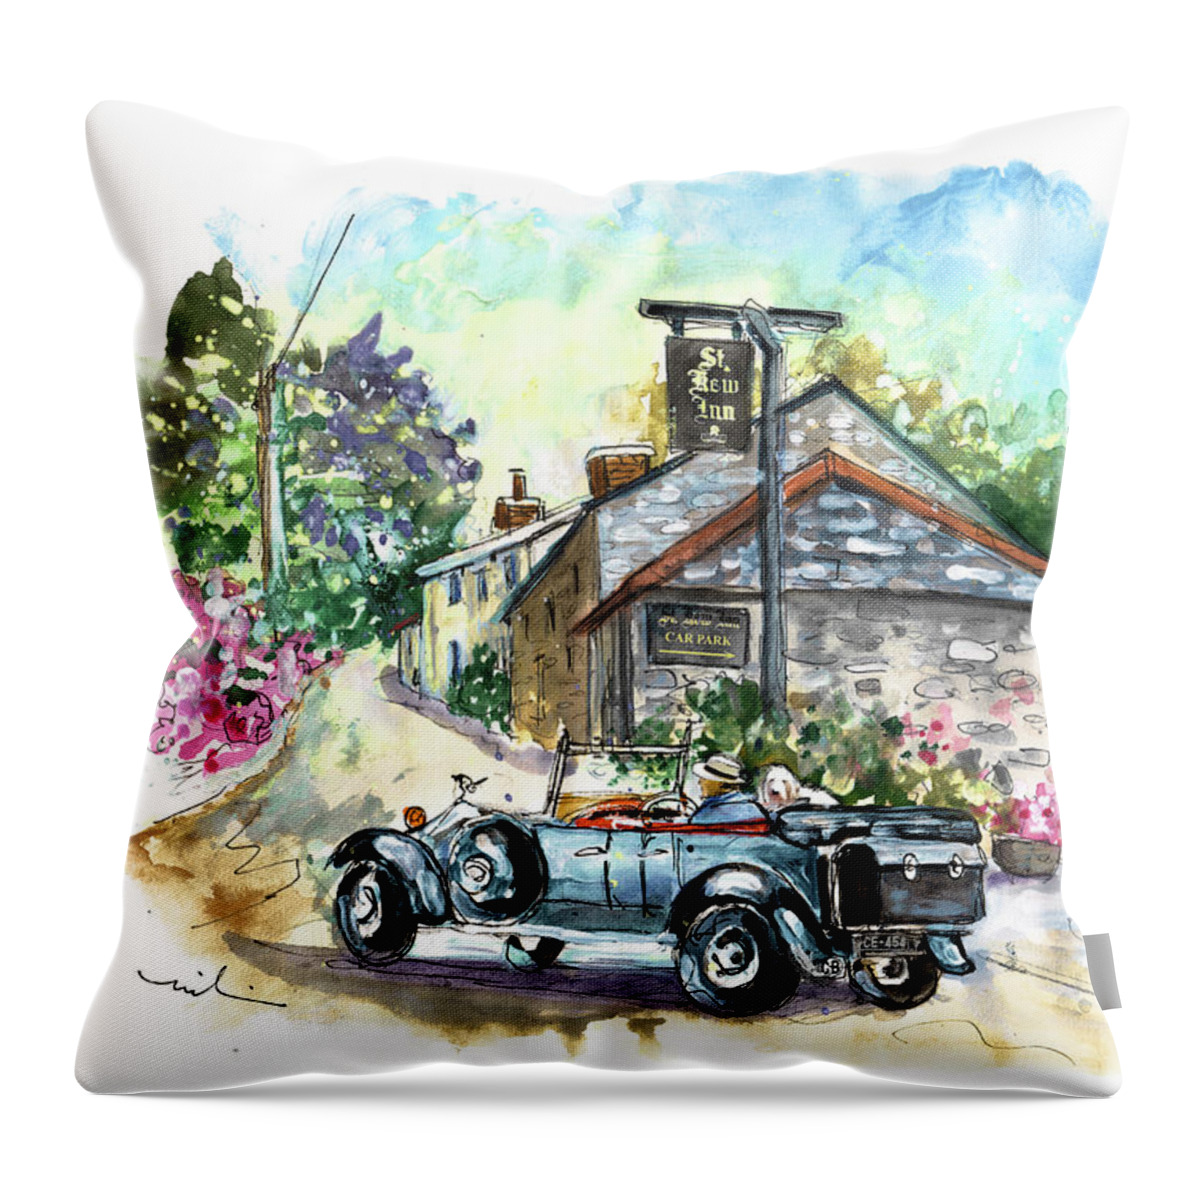 Travel Throw Pillow featuring the painting St Kew Inn In Cornwall 01 by Miki De Goodaboom